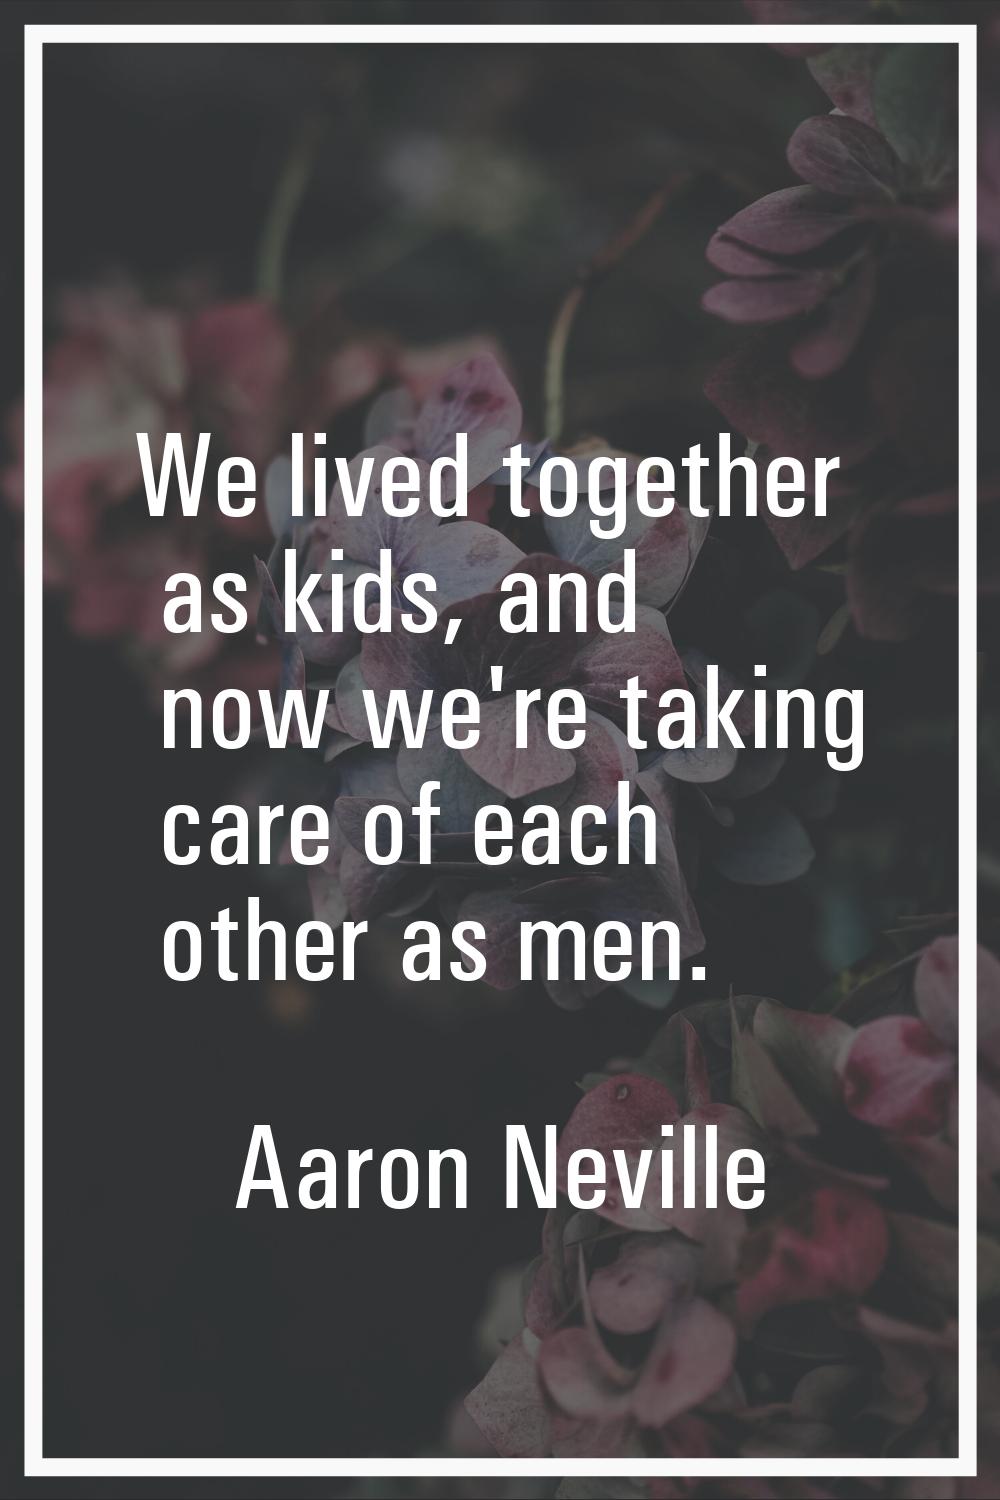 We lived together as kids, and now we're taking care of each other as men.